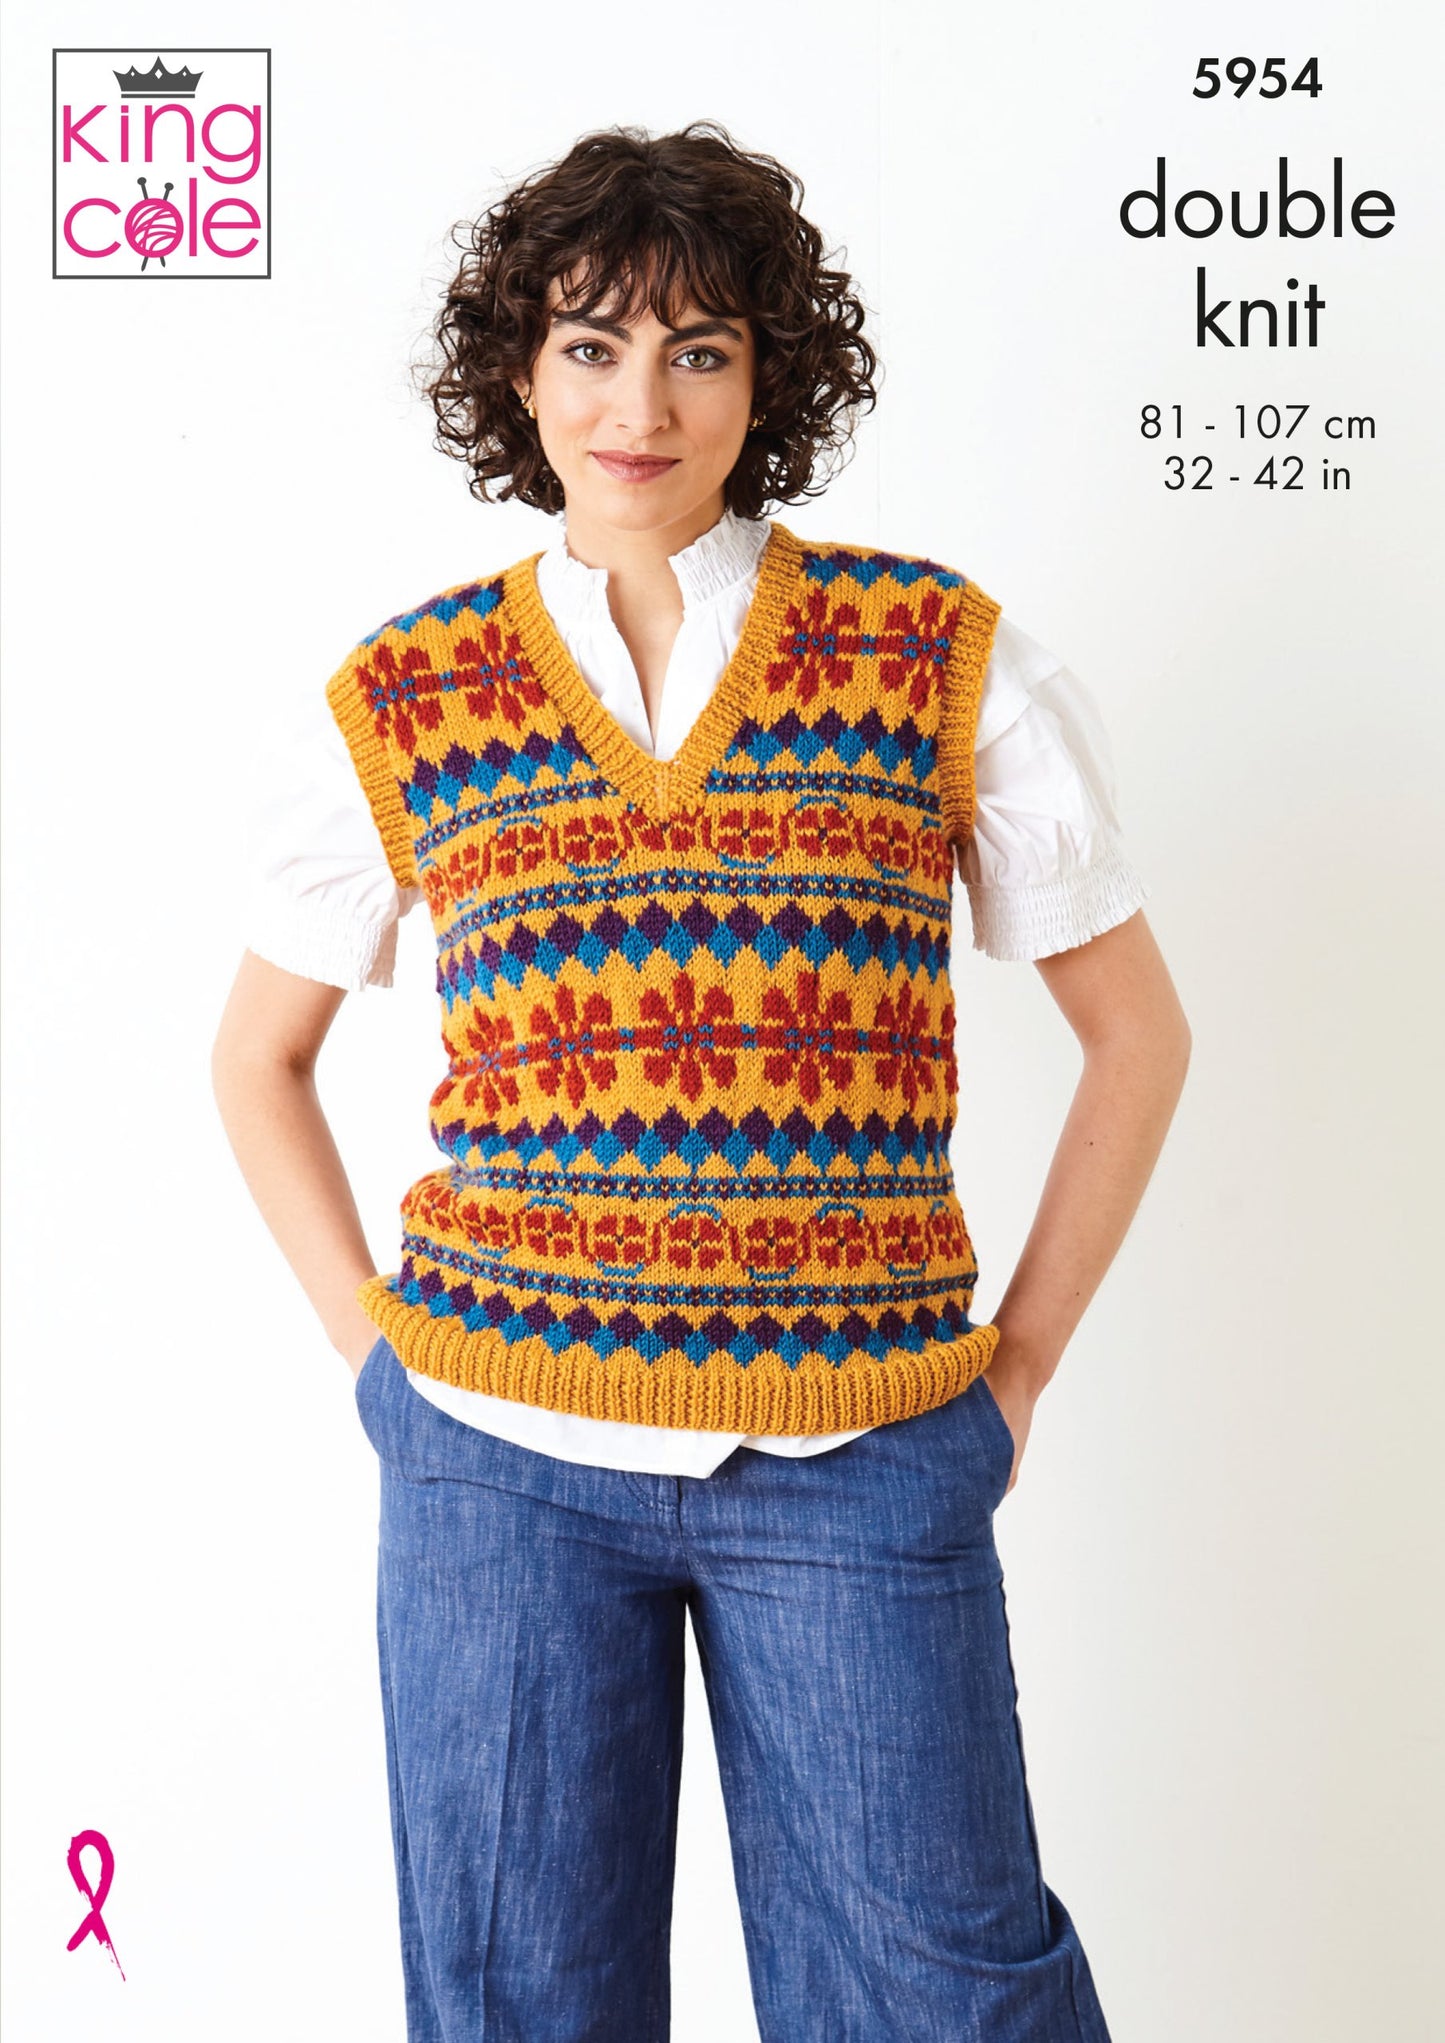 Knitting Pattern 5954 - Cardigan and Pullover: Knitted in King Cole Merino Blend DK